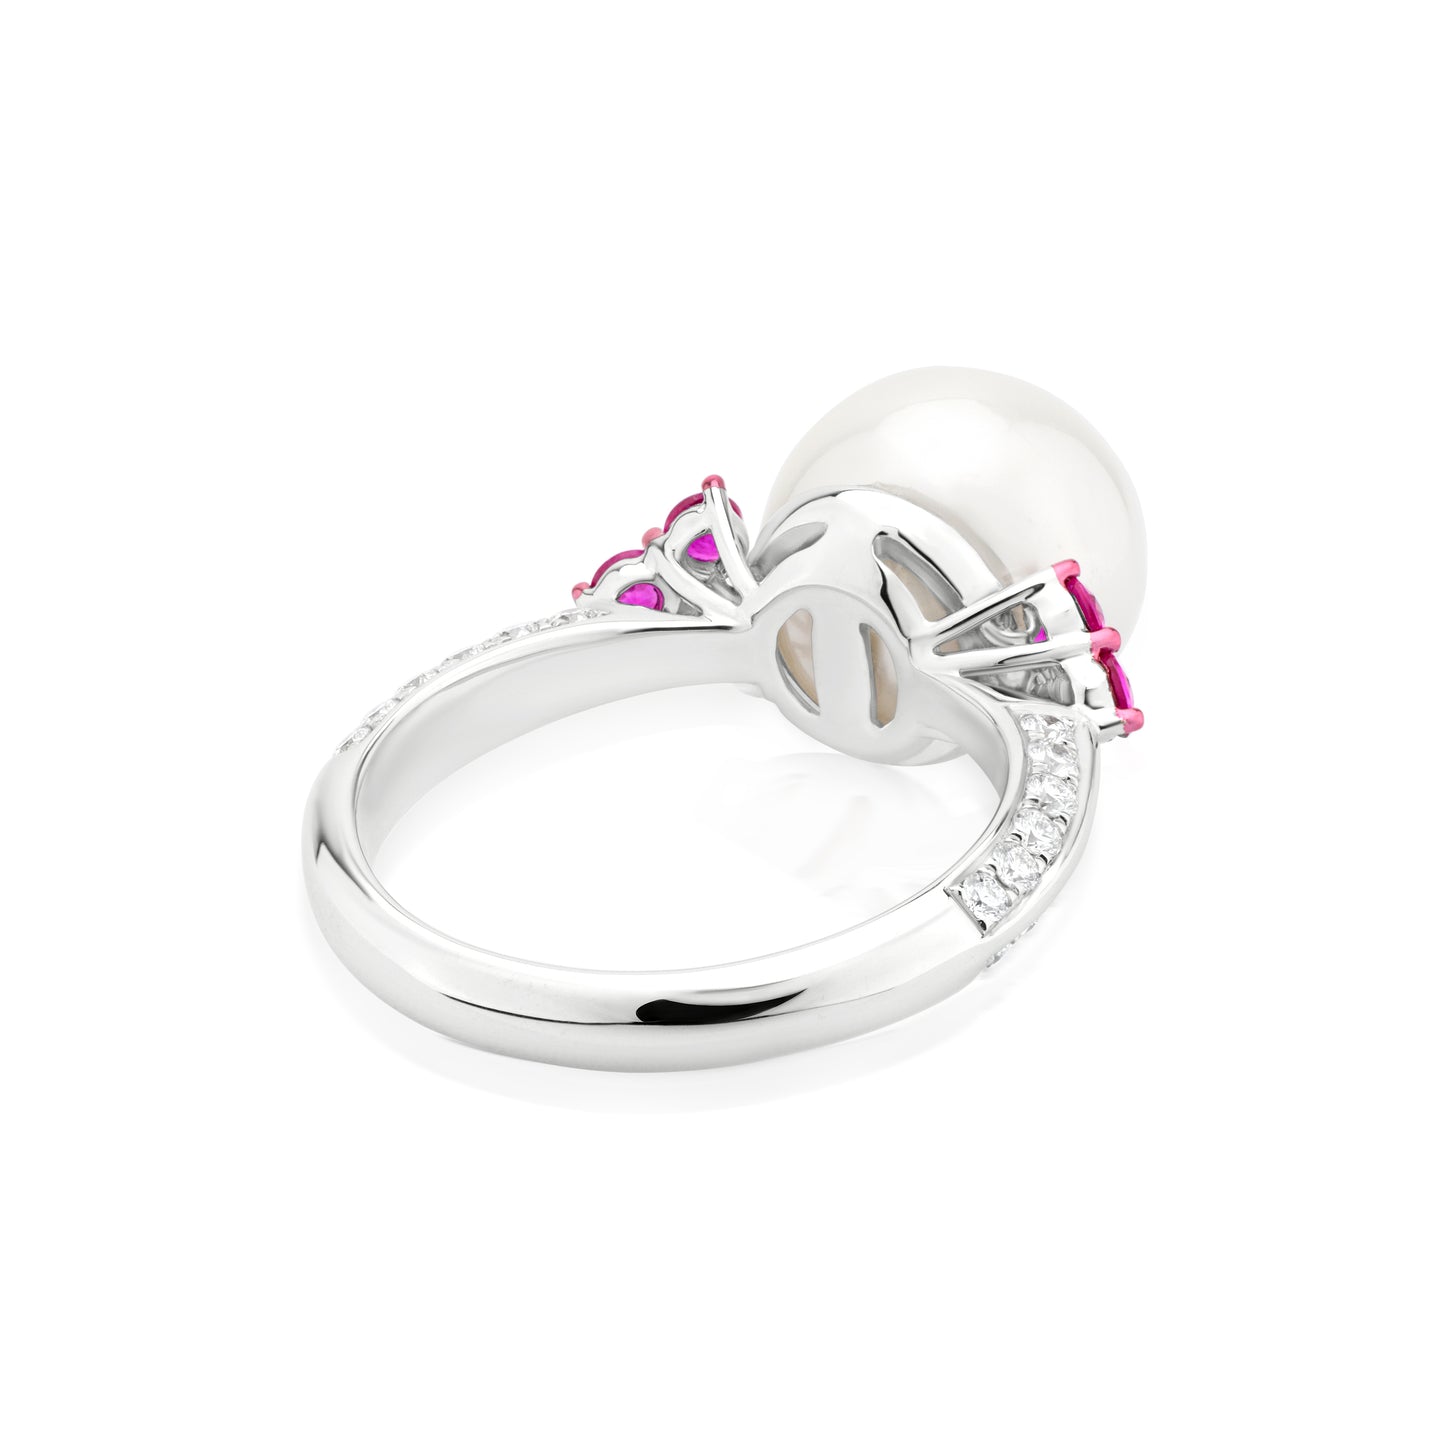 Ring With Pearl,Ruby And Diamond In 18K White Gold And Pink Rhodium